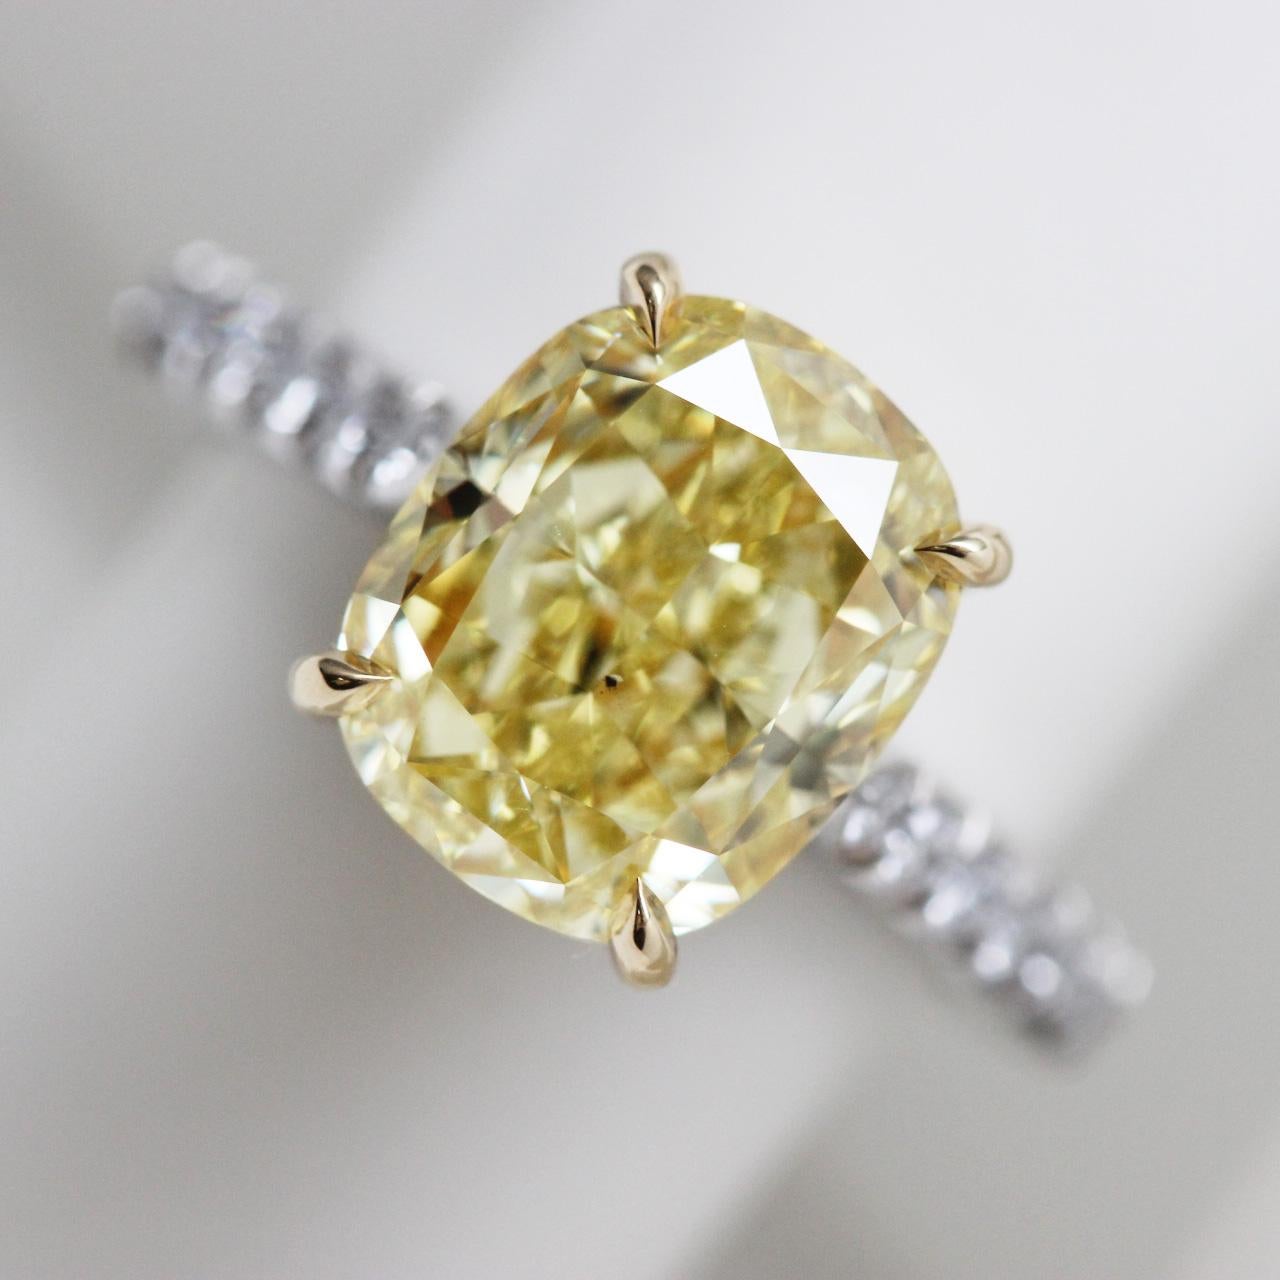 5.26 carat natural fancy intense yellow cushion cut diamond, mounted on 18k yellow gold and platinum ring. Solitaire engagement ring with 5+ carat GIA certified cushion-cut fancy colored diamond. 

Searching for a classic engagement ring with a